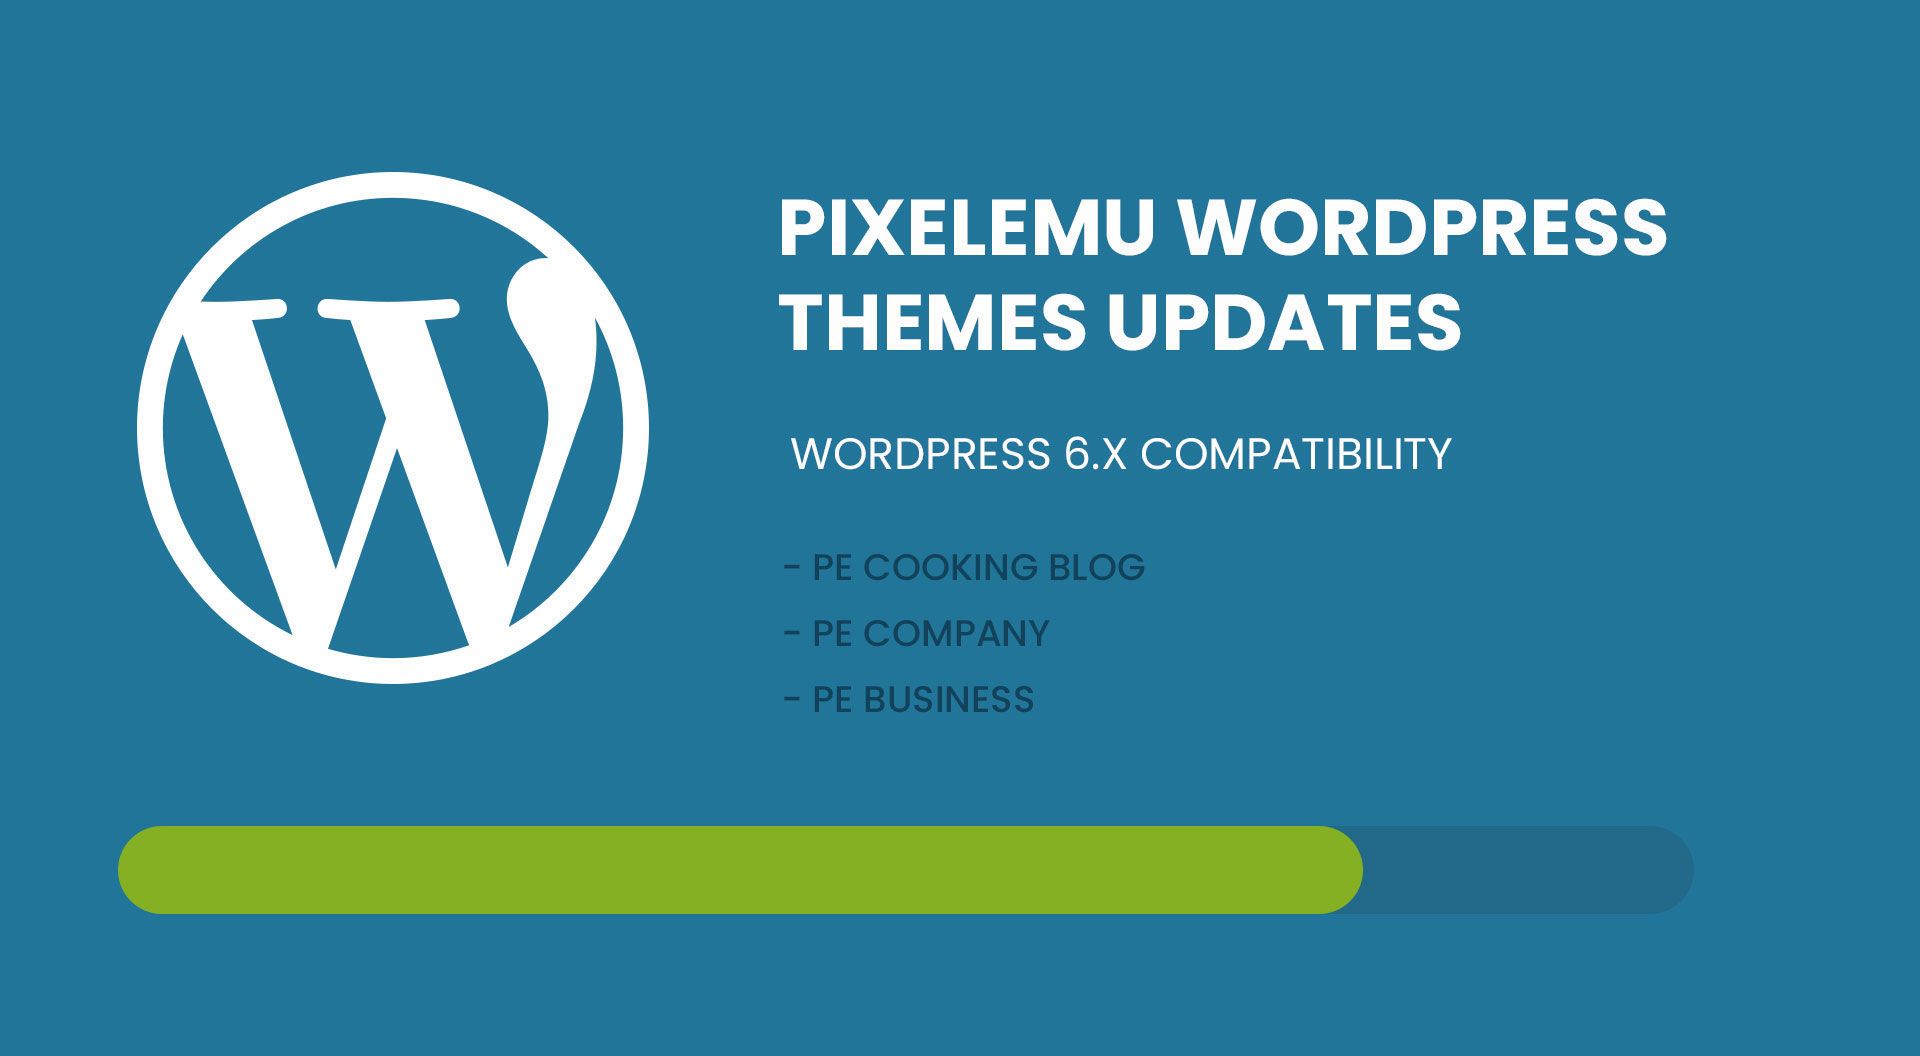 All PixelEmu WordPress themes are now compatible with WordPress 6.x